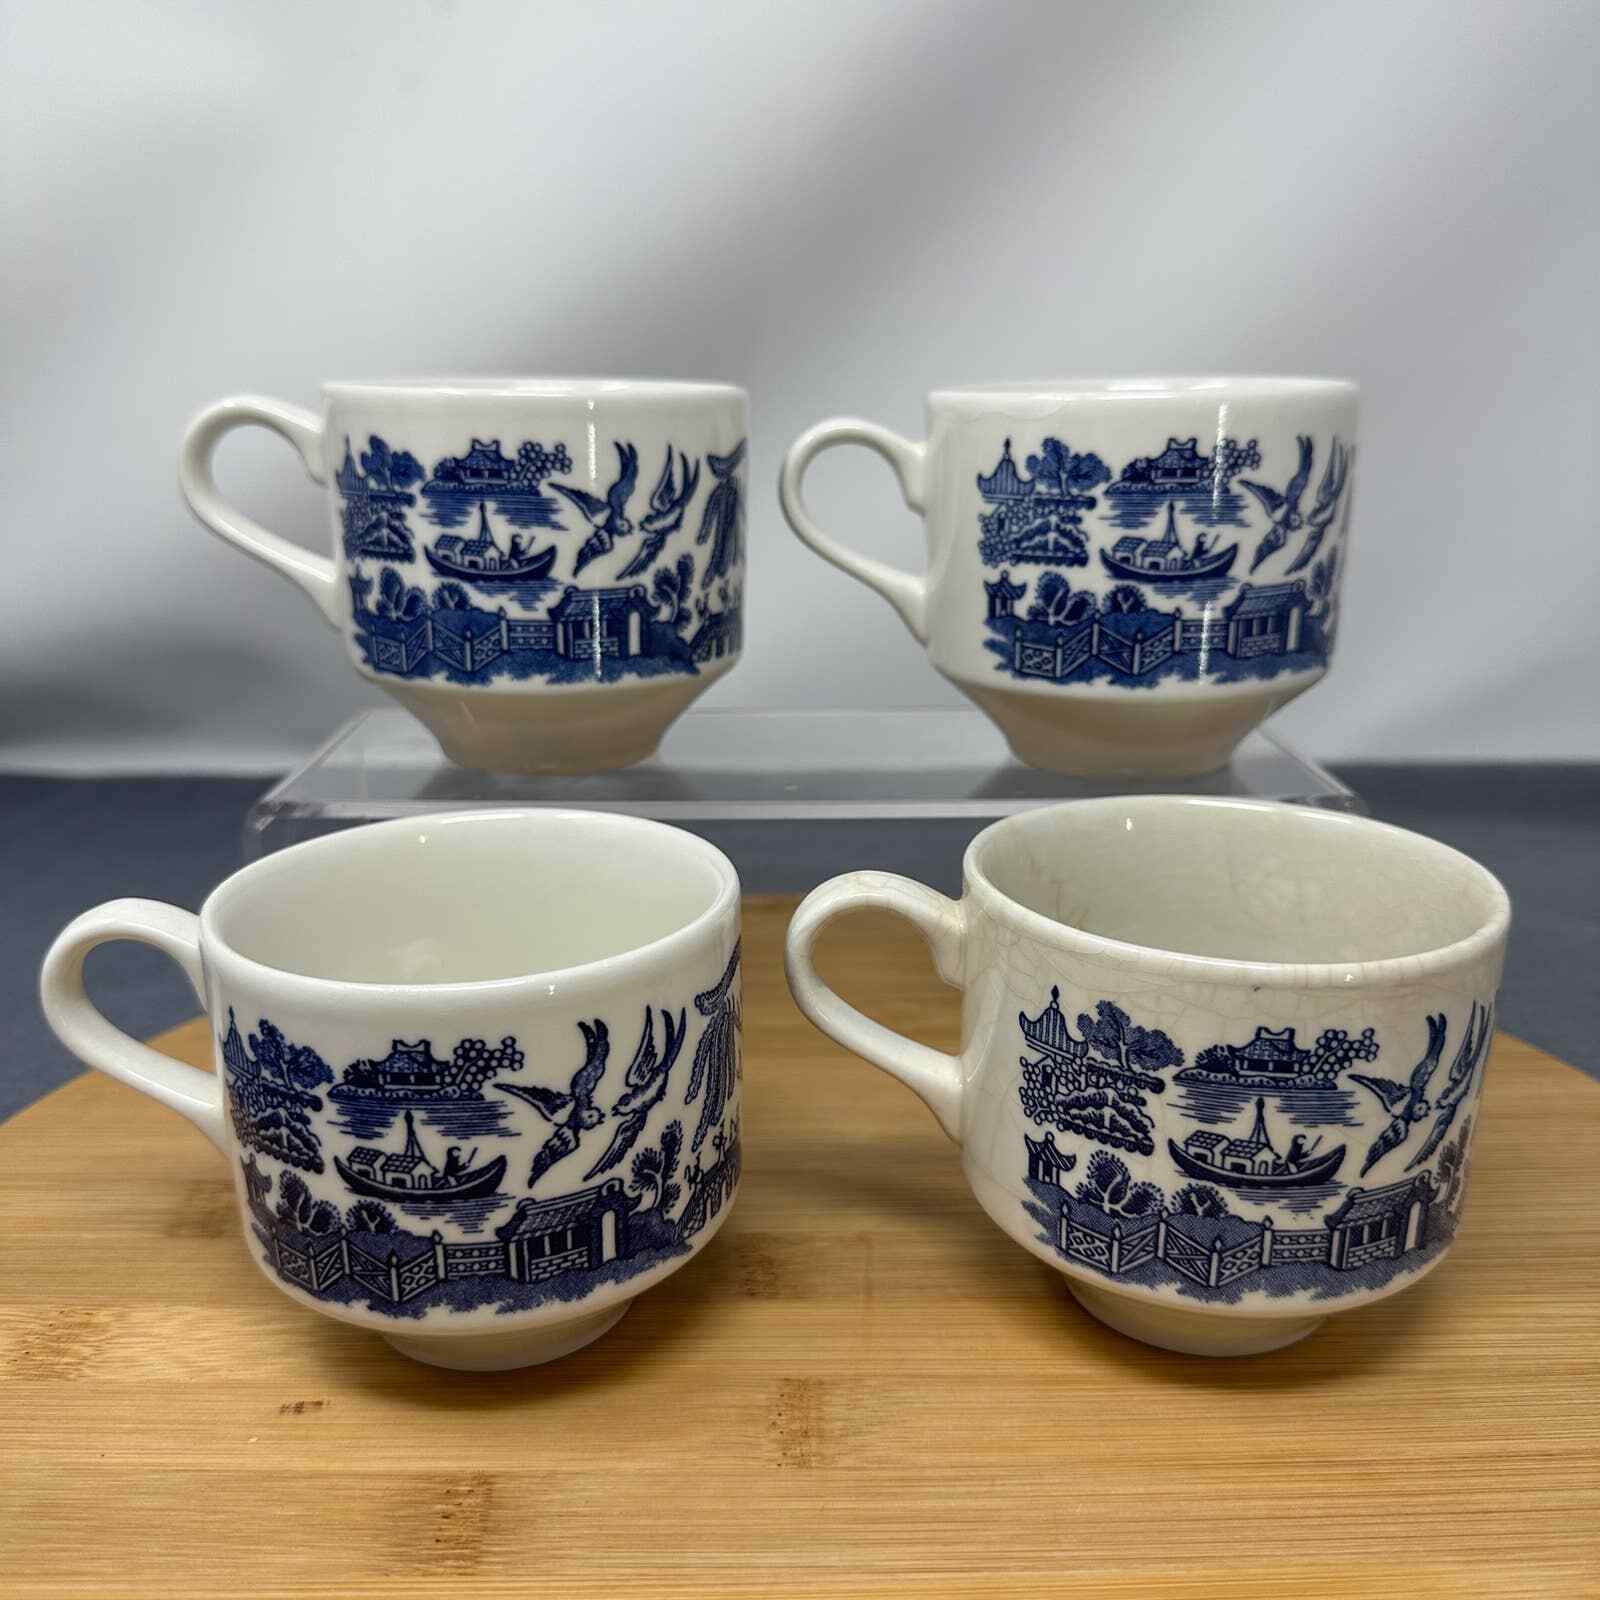 Set of 4 Vintage Churchill Blue Willow China Coffee Tea Cup Mugs Made in England